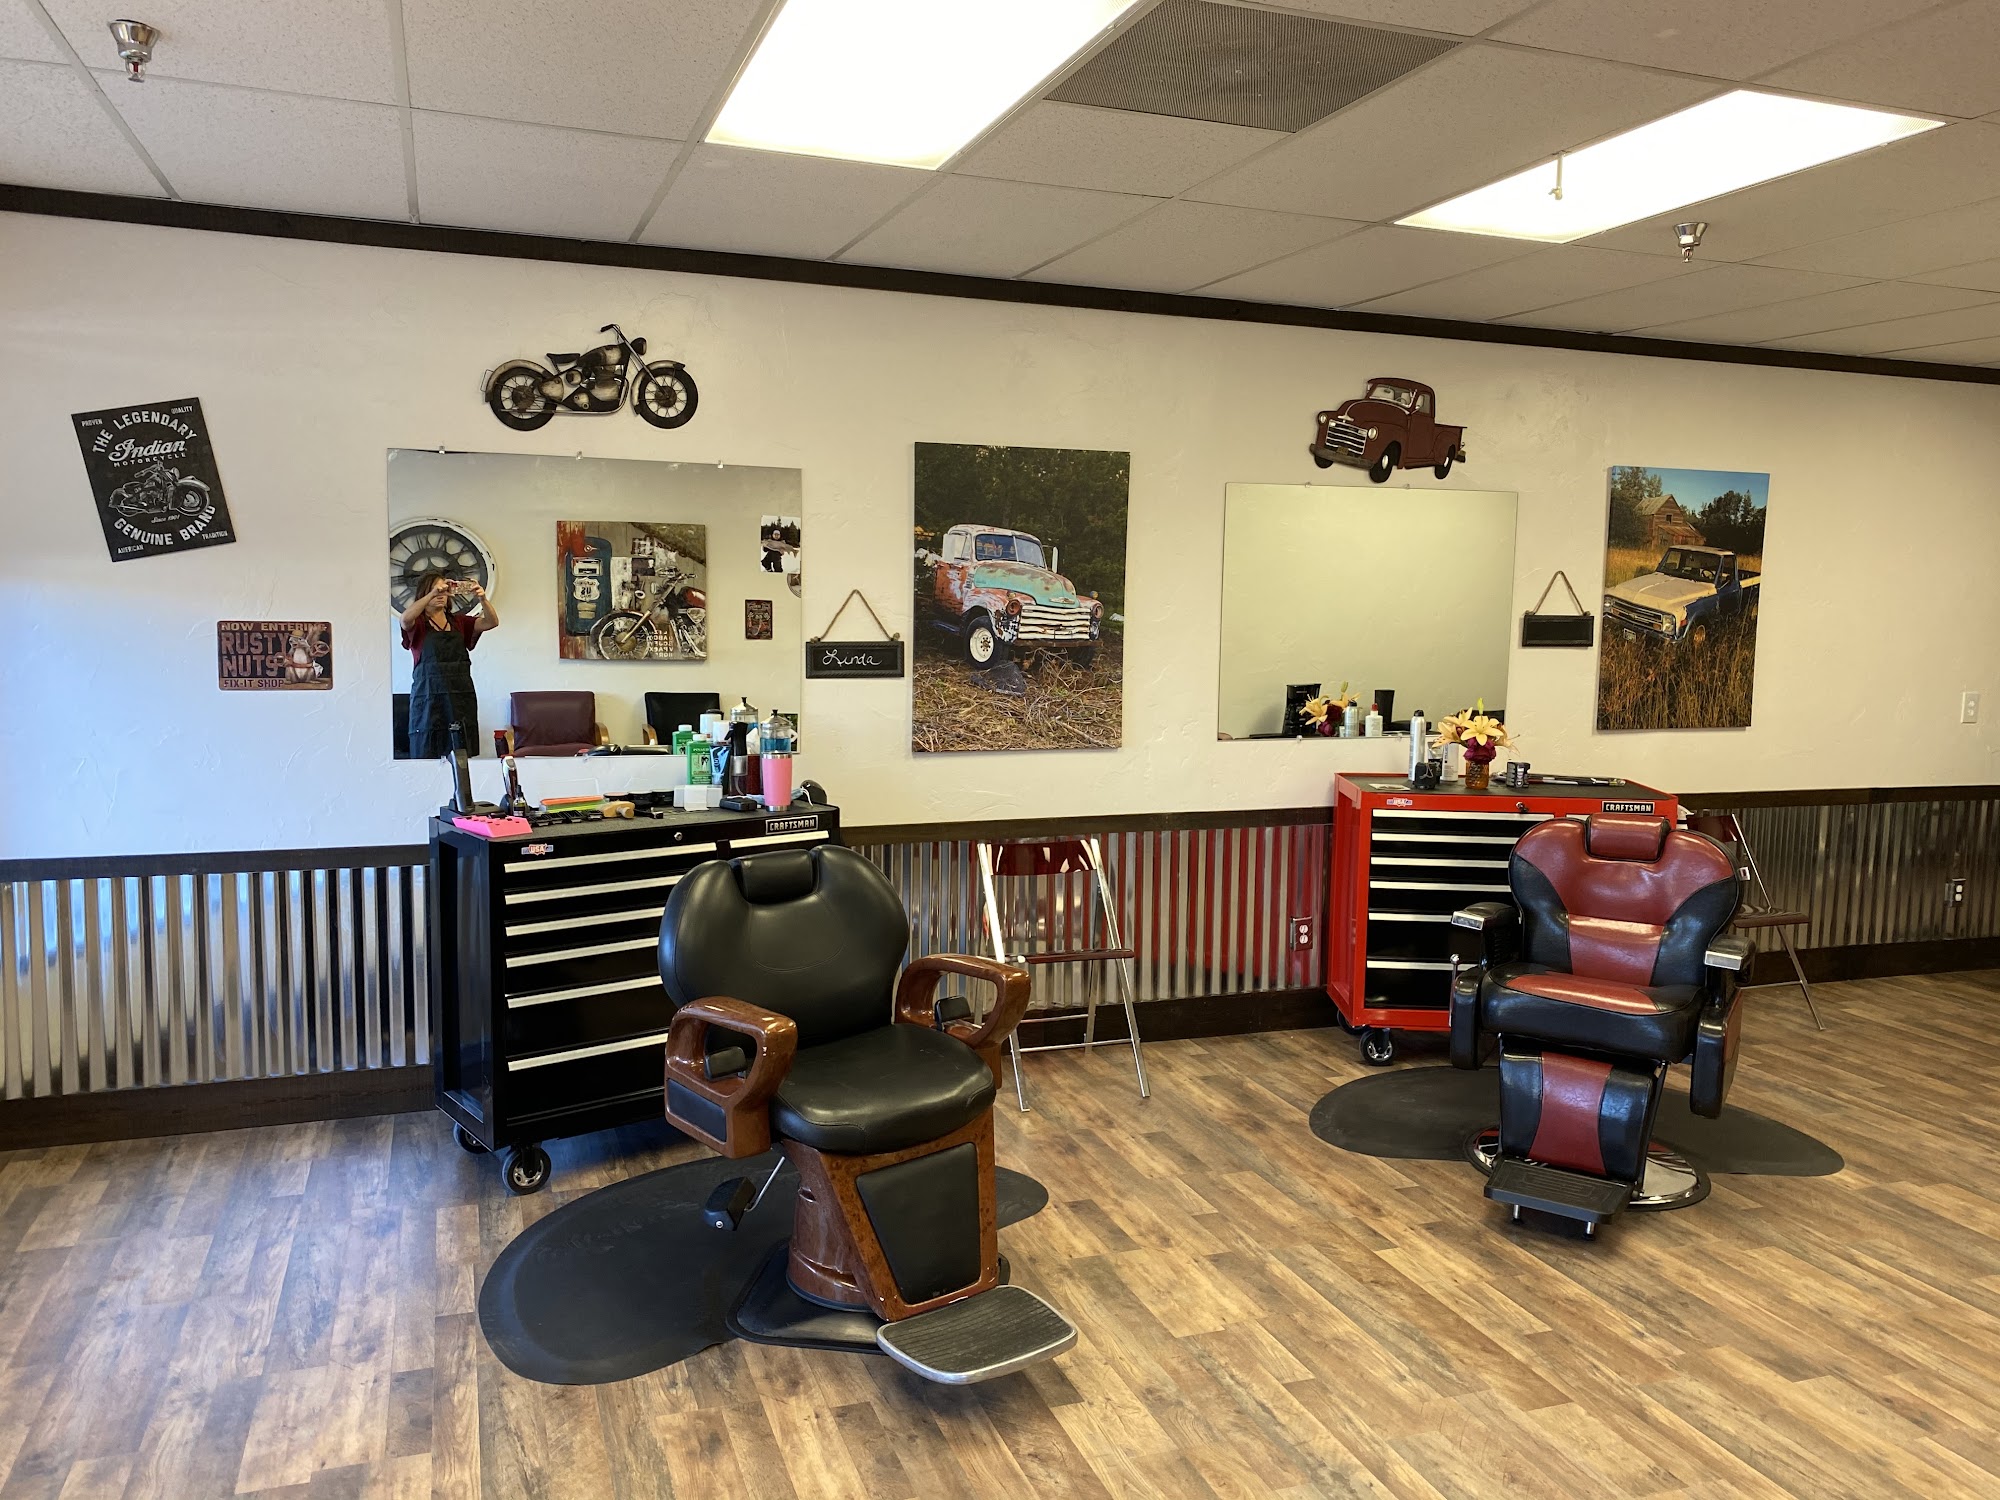 406 Chop Shop 2181 Hwy 2 East, Suite 2, Evergreen Montana 59901